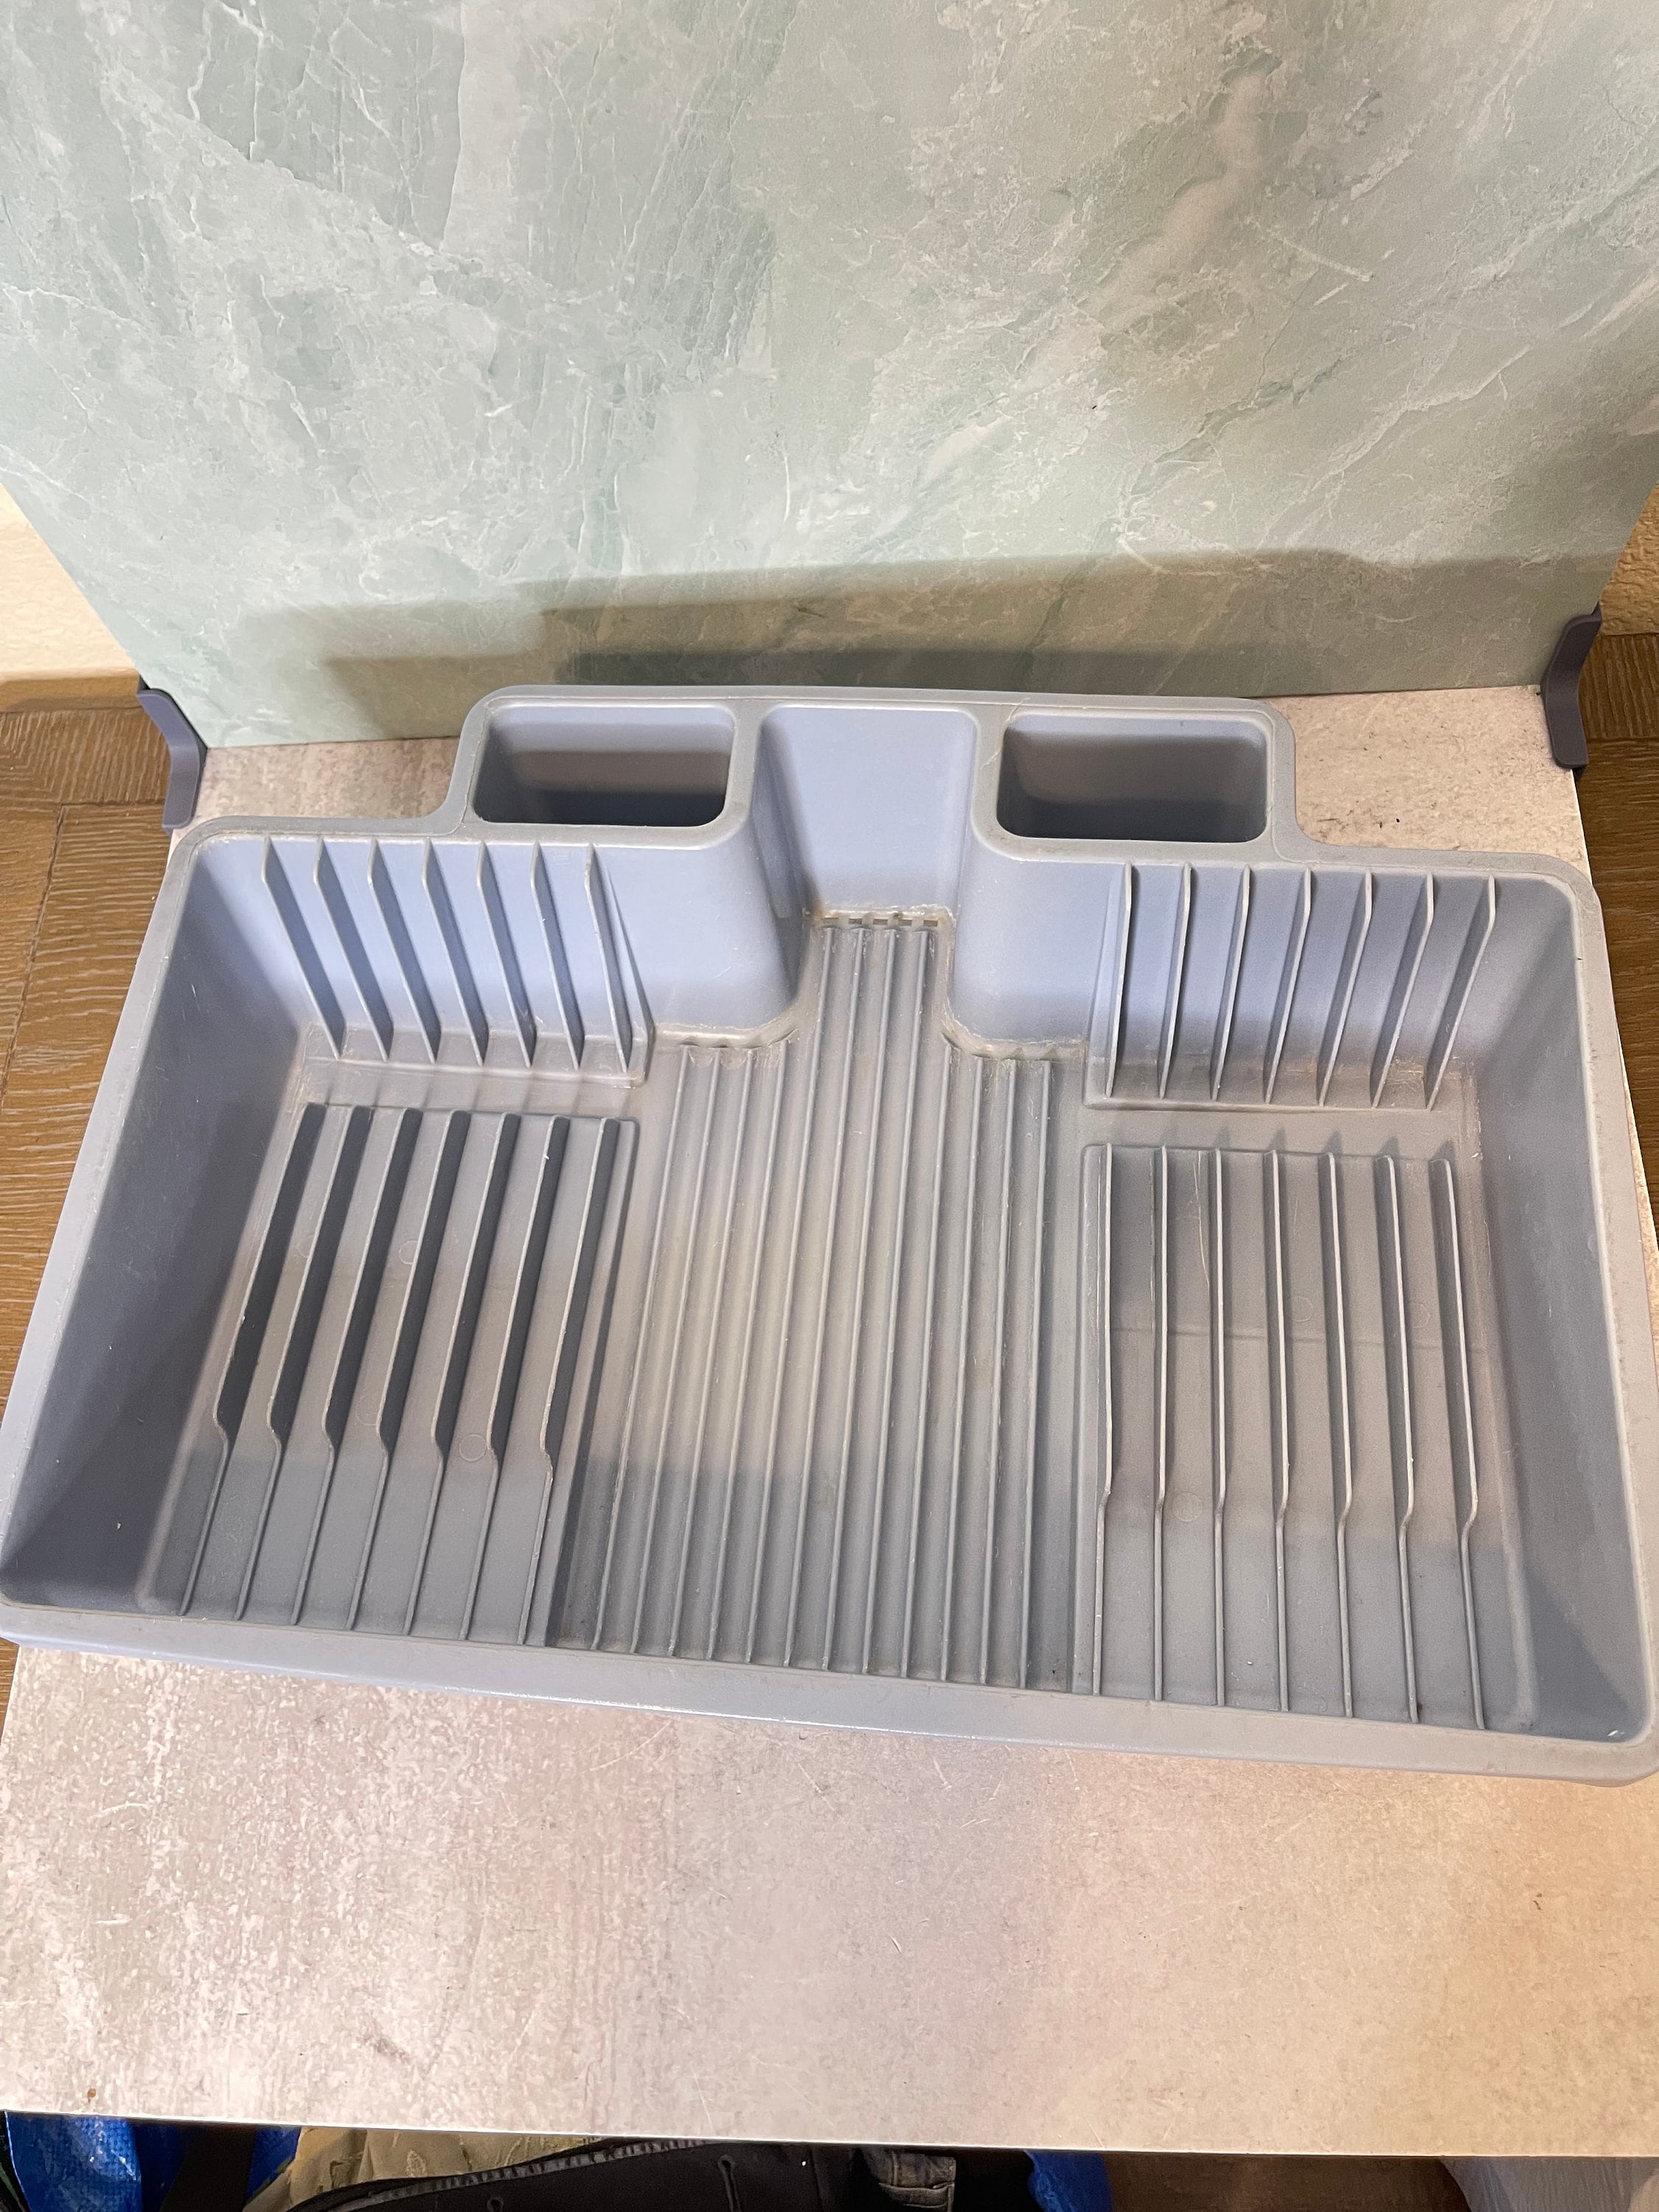 Vintage Dish Drainer, Rubbermaid Dish Rack, All in One Dish Drain